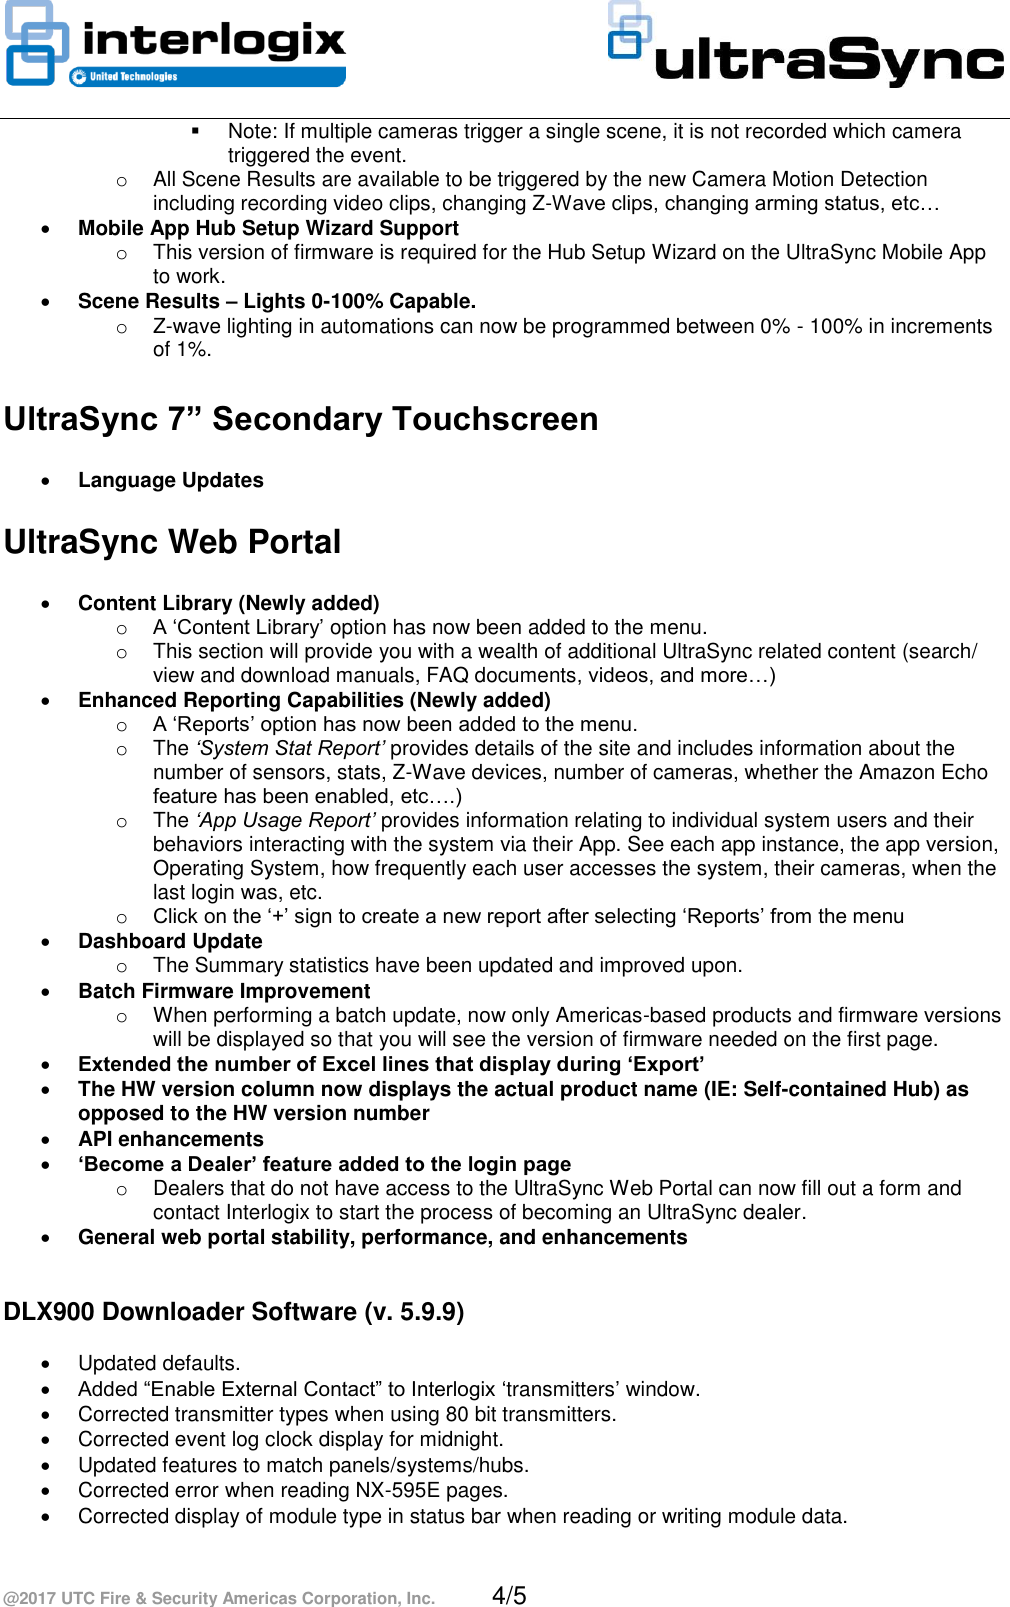 Page 4 of 5 - InterLogix Ultrasync-3.2-Service-Release-Notes UltraSec Release Note User Manual